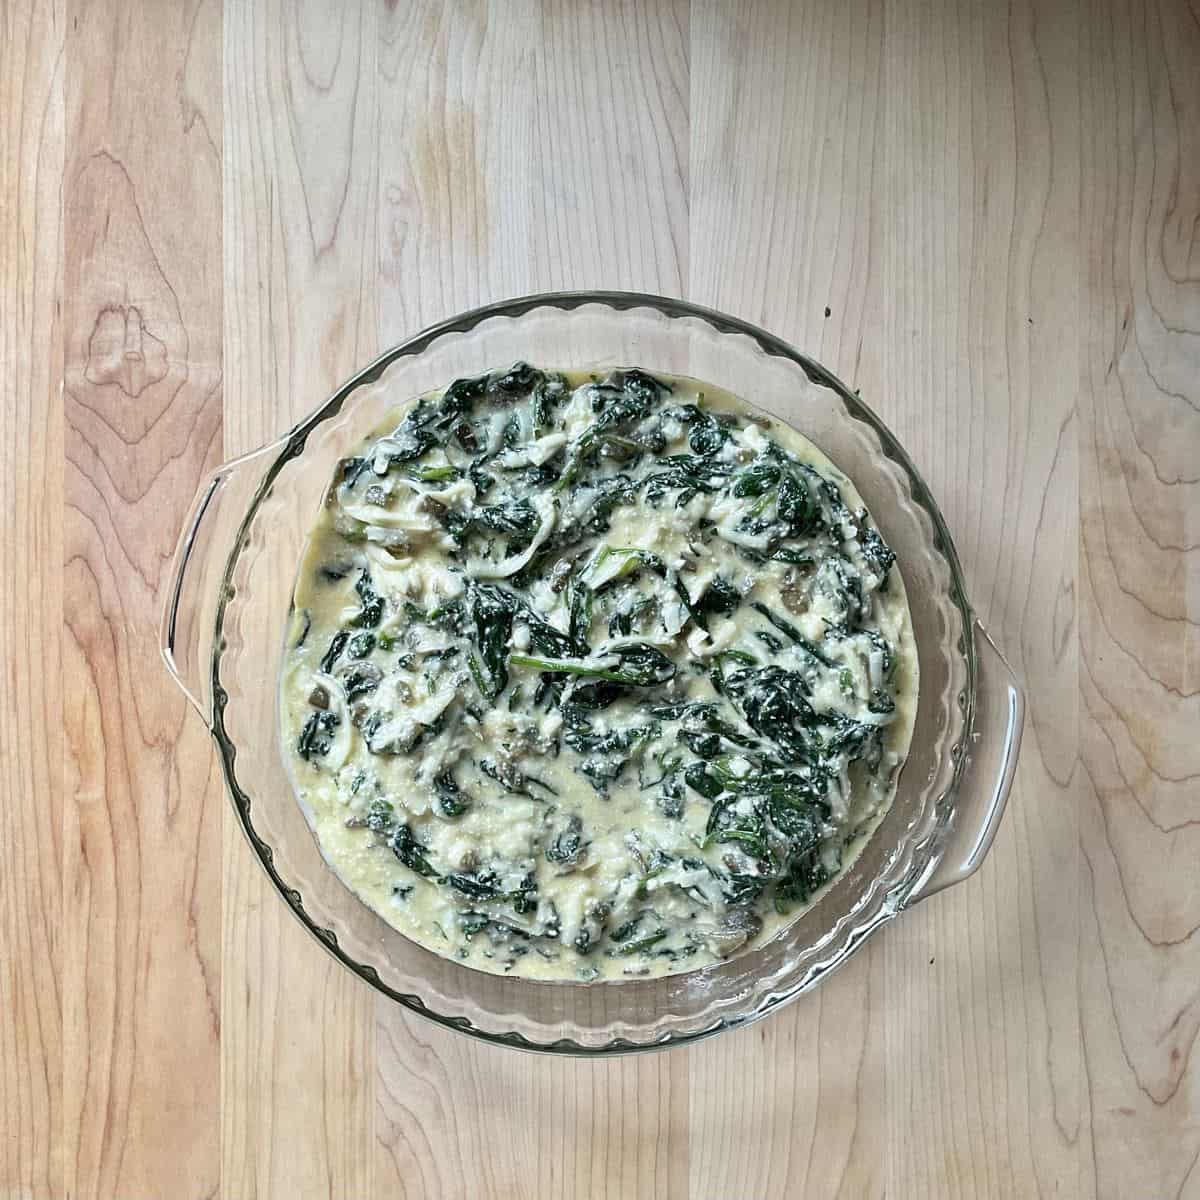 The spinach, egg and cheese filling for a crustless quiche in a pan.